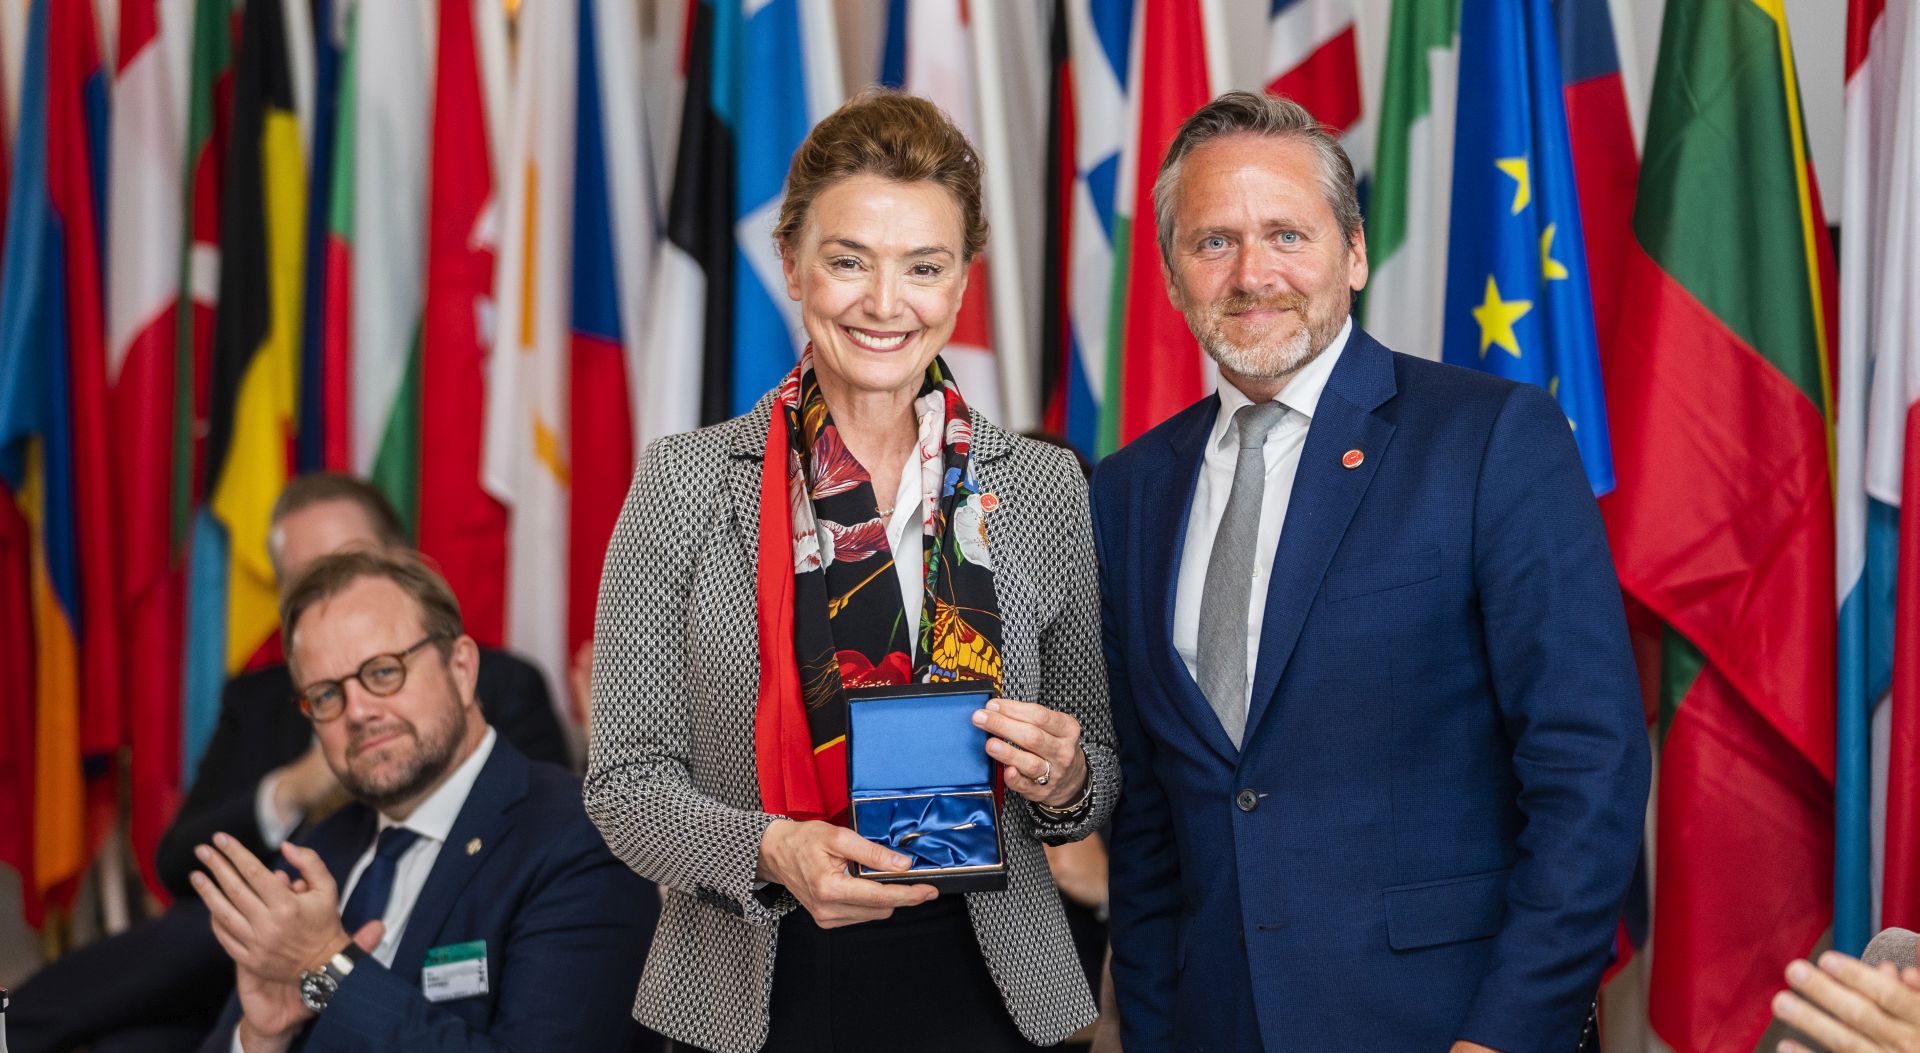 epa06747264 Danish Foreign Minister Anders Samuelsen (R) hands over the insignia of the regular changing presidency to Croatia's Foreign Minister Marija Pejcinovic Buric (C) at the end of the Council of Europe Committee of Ministers Annual Session, in Elsingoer, Denmark, 18 May 2018. The meeting of the 47 member states' Foreign Ministers was aimed at discussing topics such as 'the state of democracy, human rights and the rule of law in Europe, conflicts and crises in Europe, securing the long-term effectiveness of the system of the European Convention on Human Rights and co-operation with the European Union', according to a Council of Europe's media information. Others are not identified.  EPA/MARTIN SYLVEST DENMARK OUT